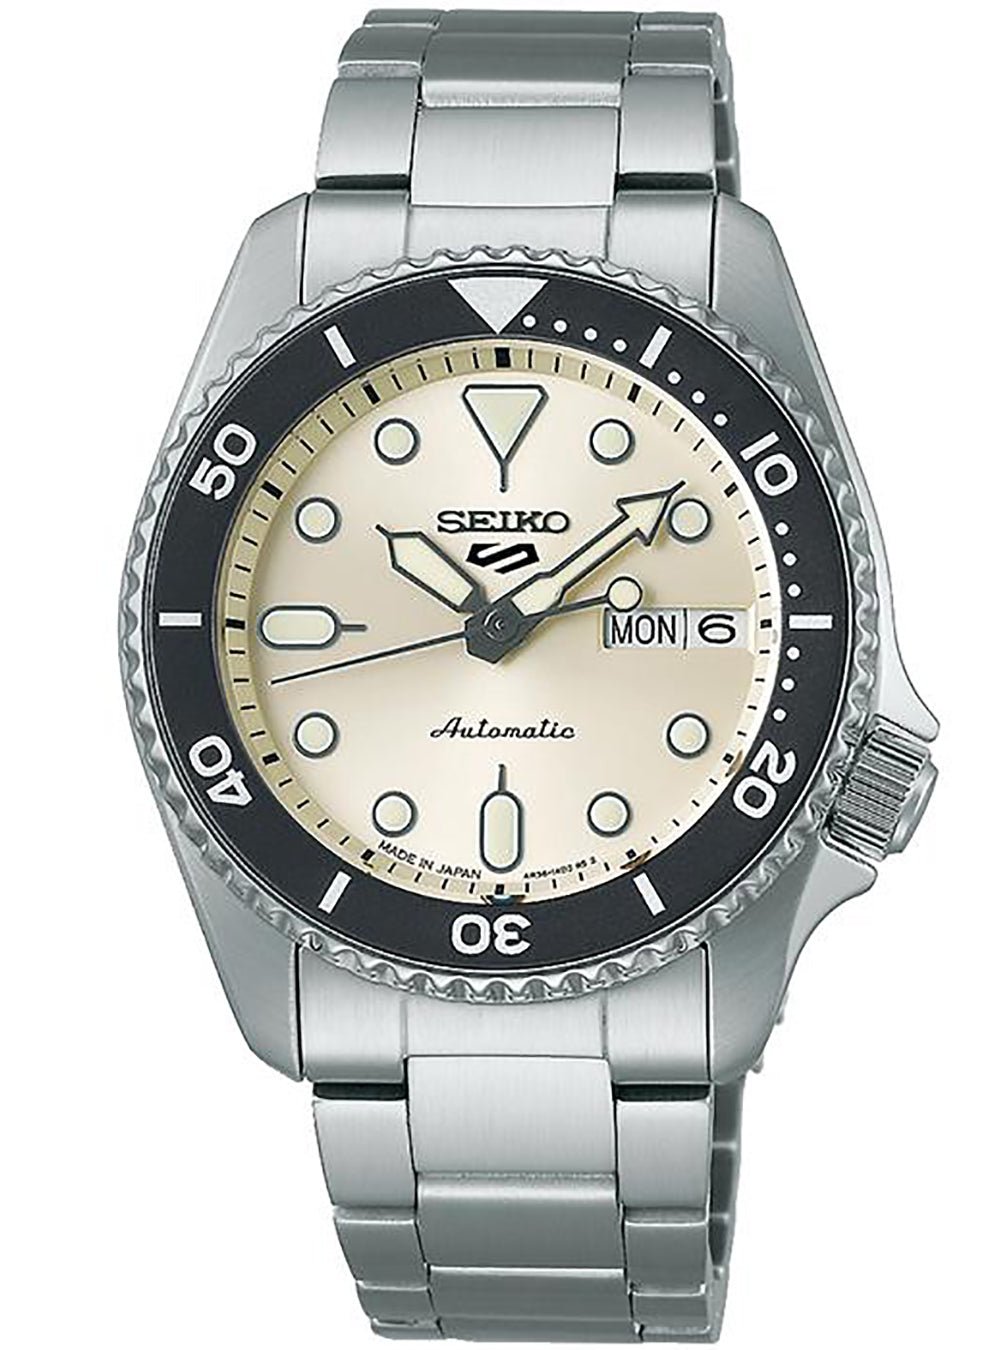 SEIKO 5 SPORTS SKX SPORTS STYLE MADE IN JAPAN JDM – japan-select